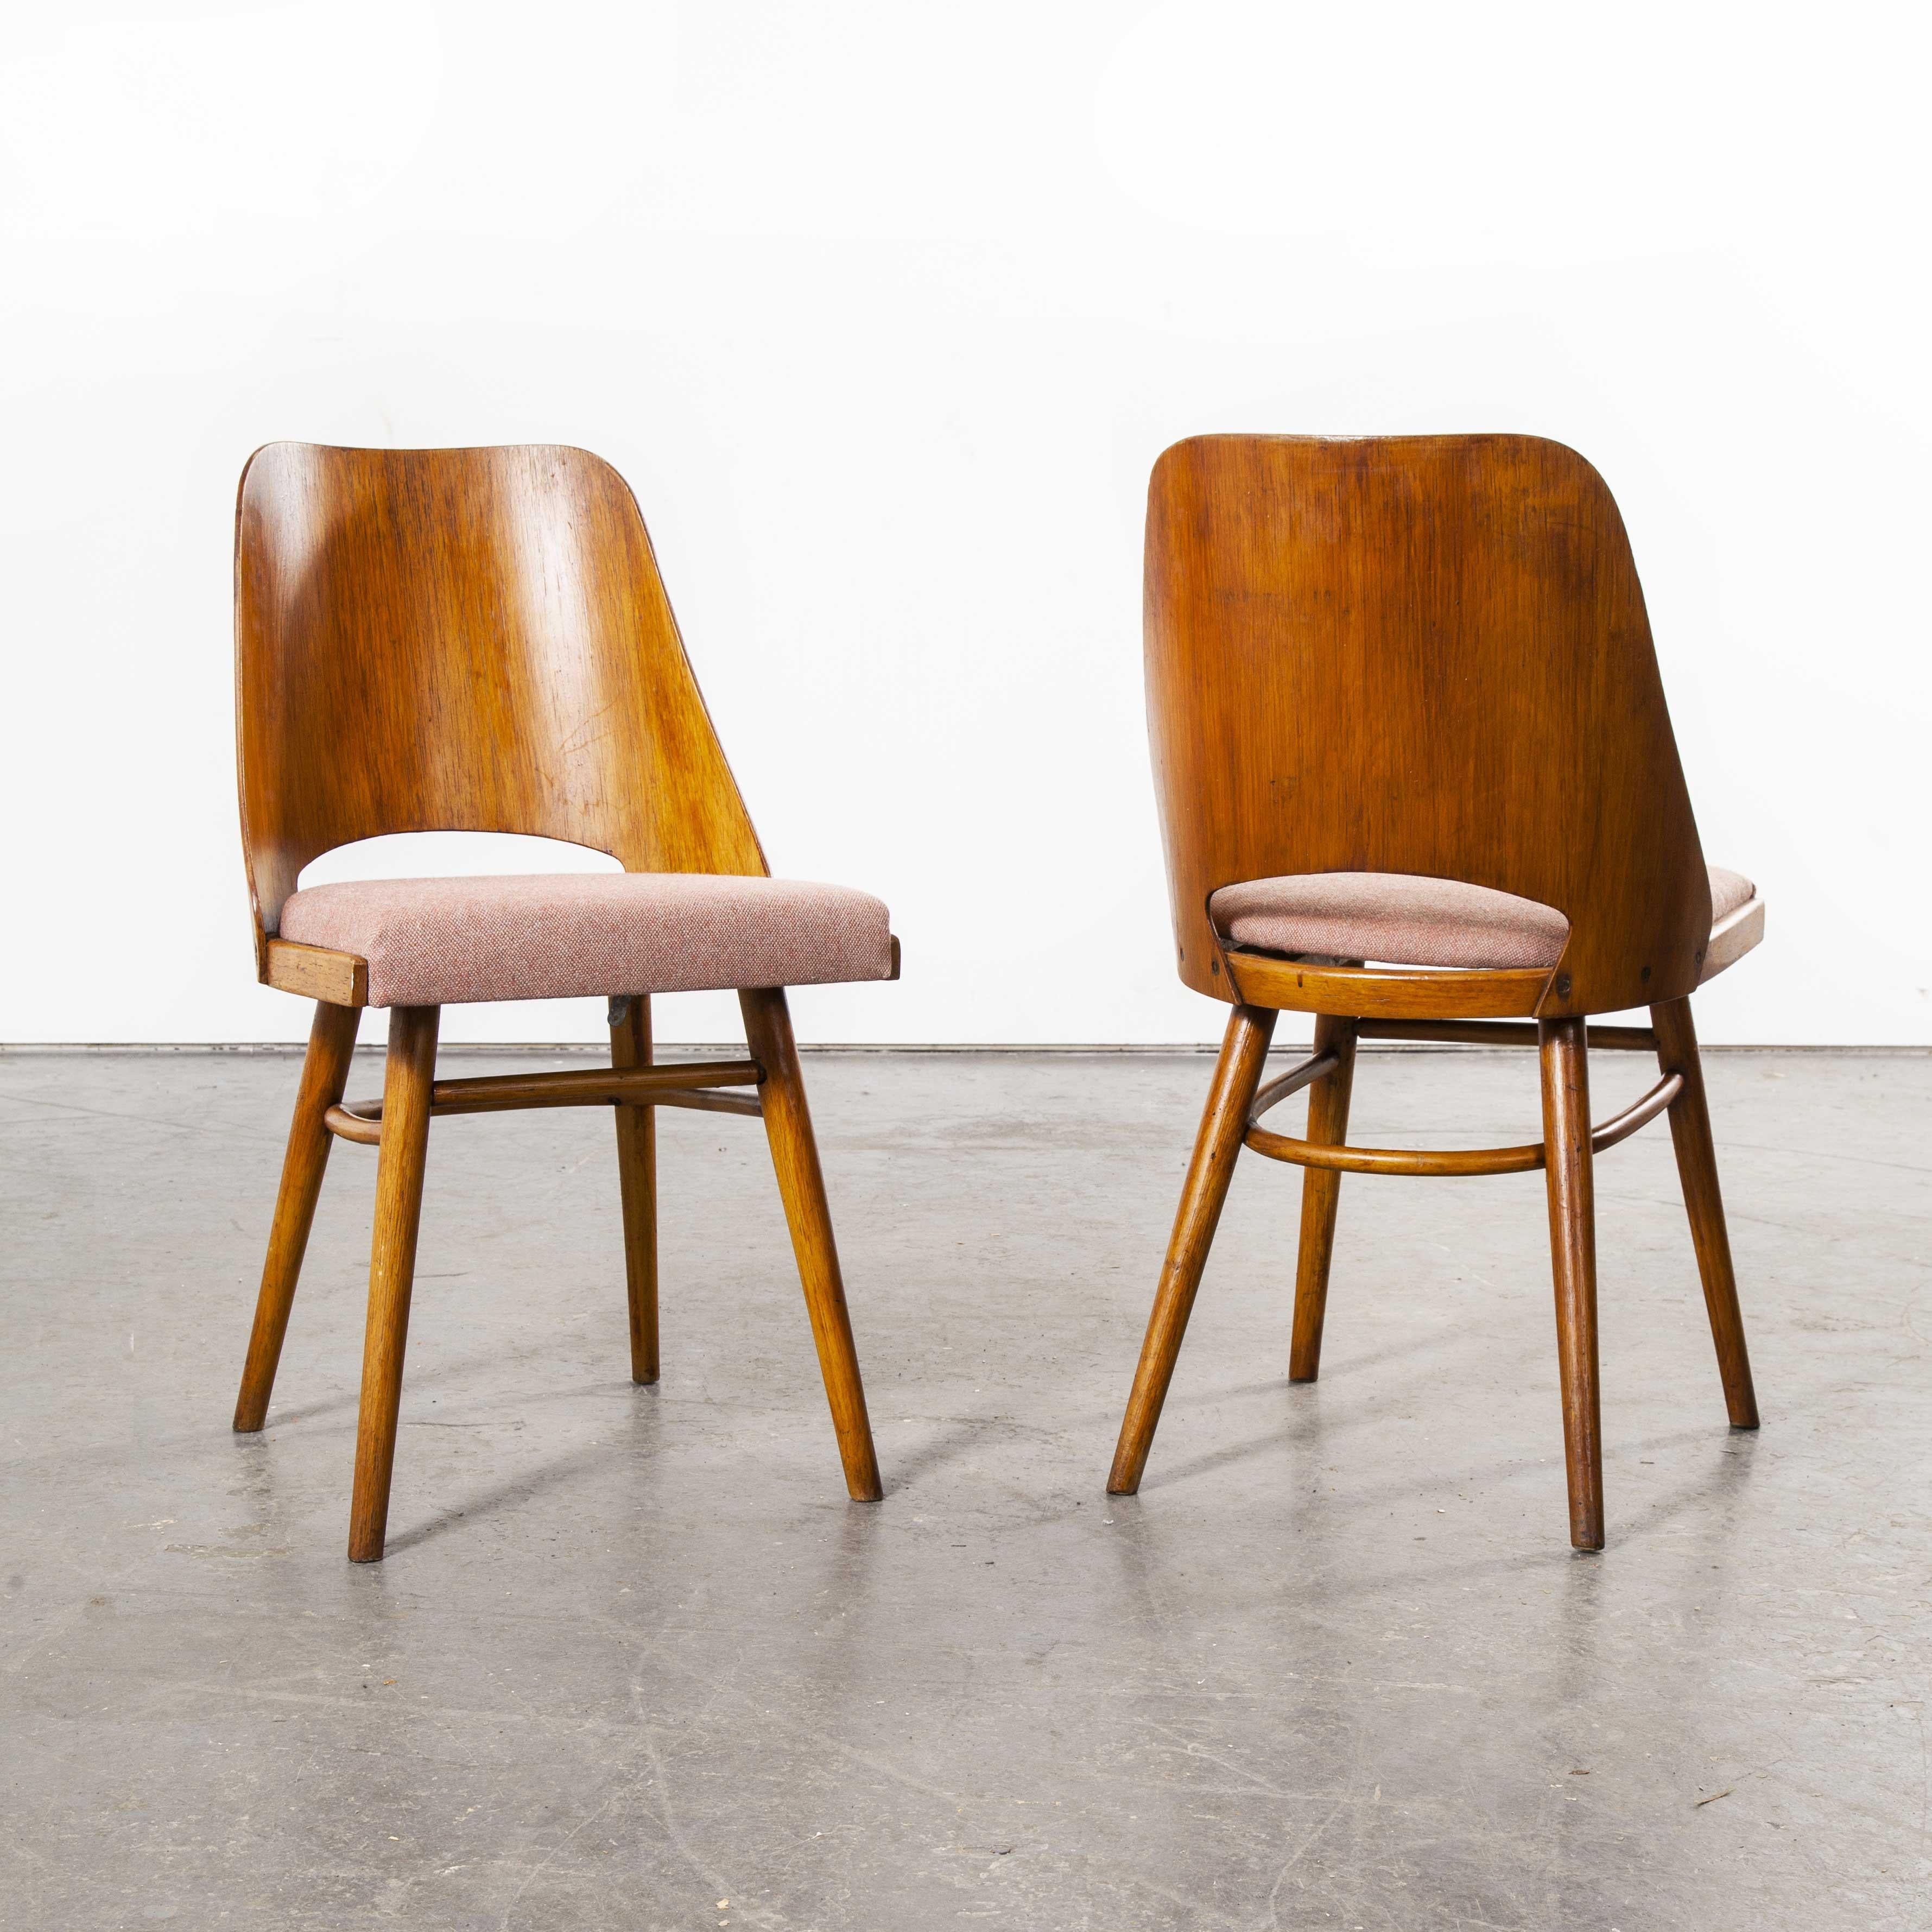 Mid-20th Century 1950s Ton Upholstered Dining Chairs by Radomir Hoffman, Pair